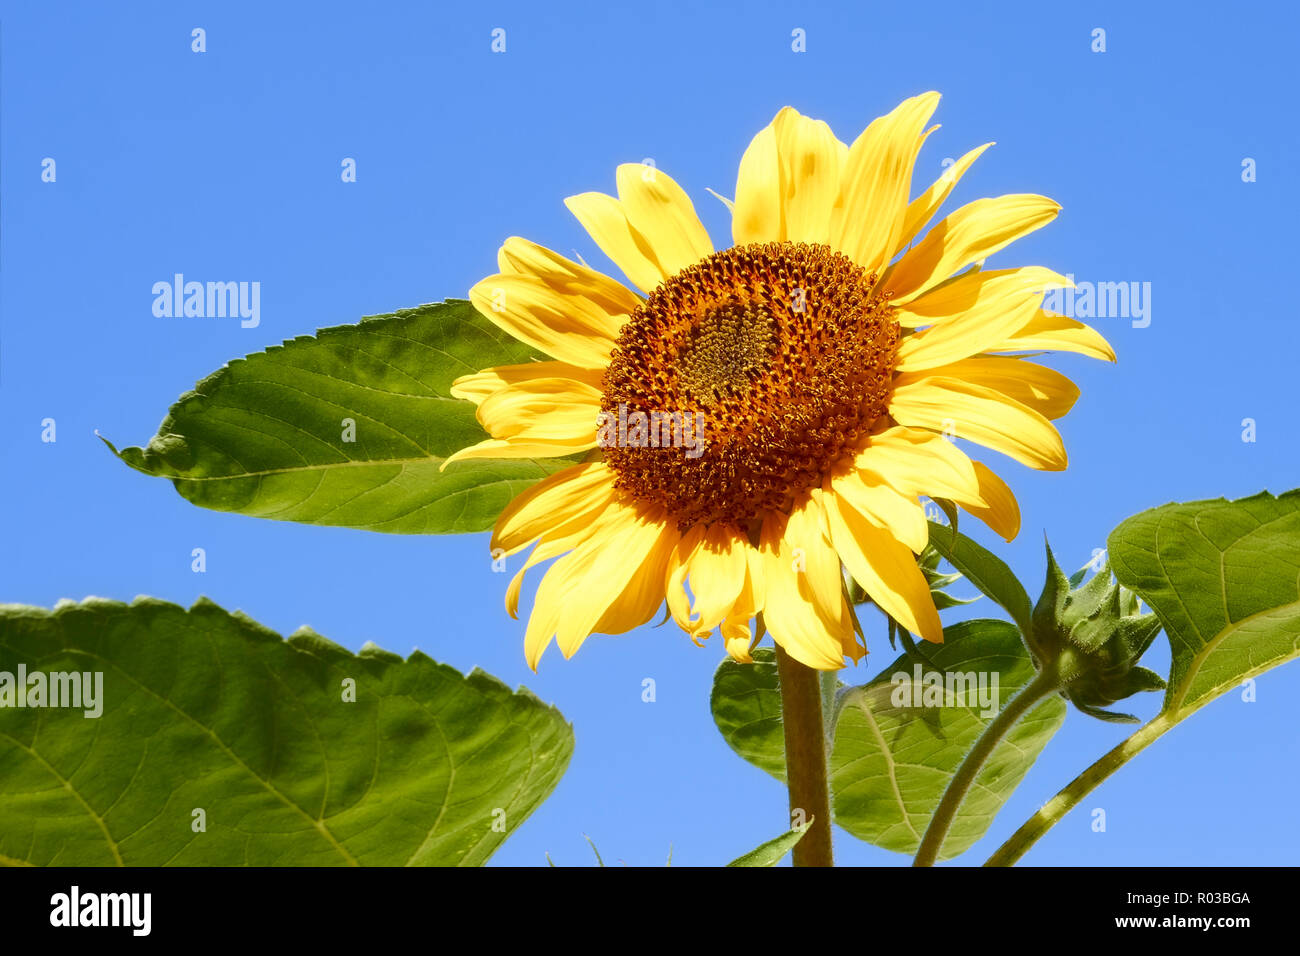 Sunflower against blue sky in fine summer day close-up Stock Photo